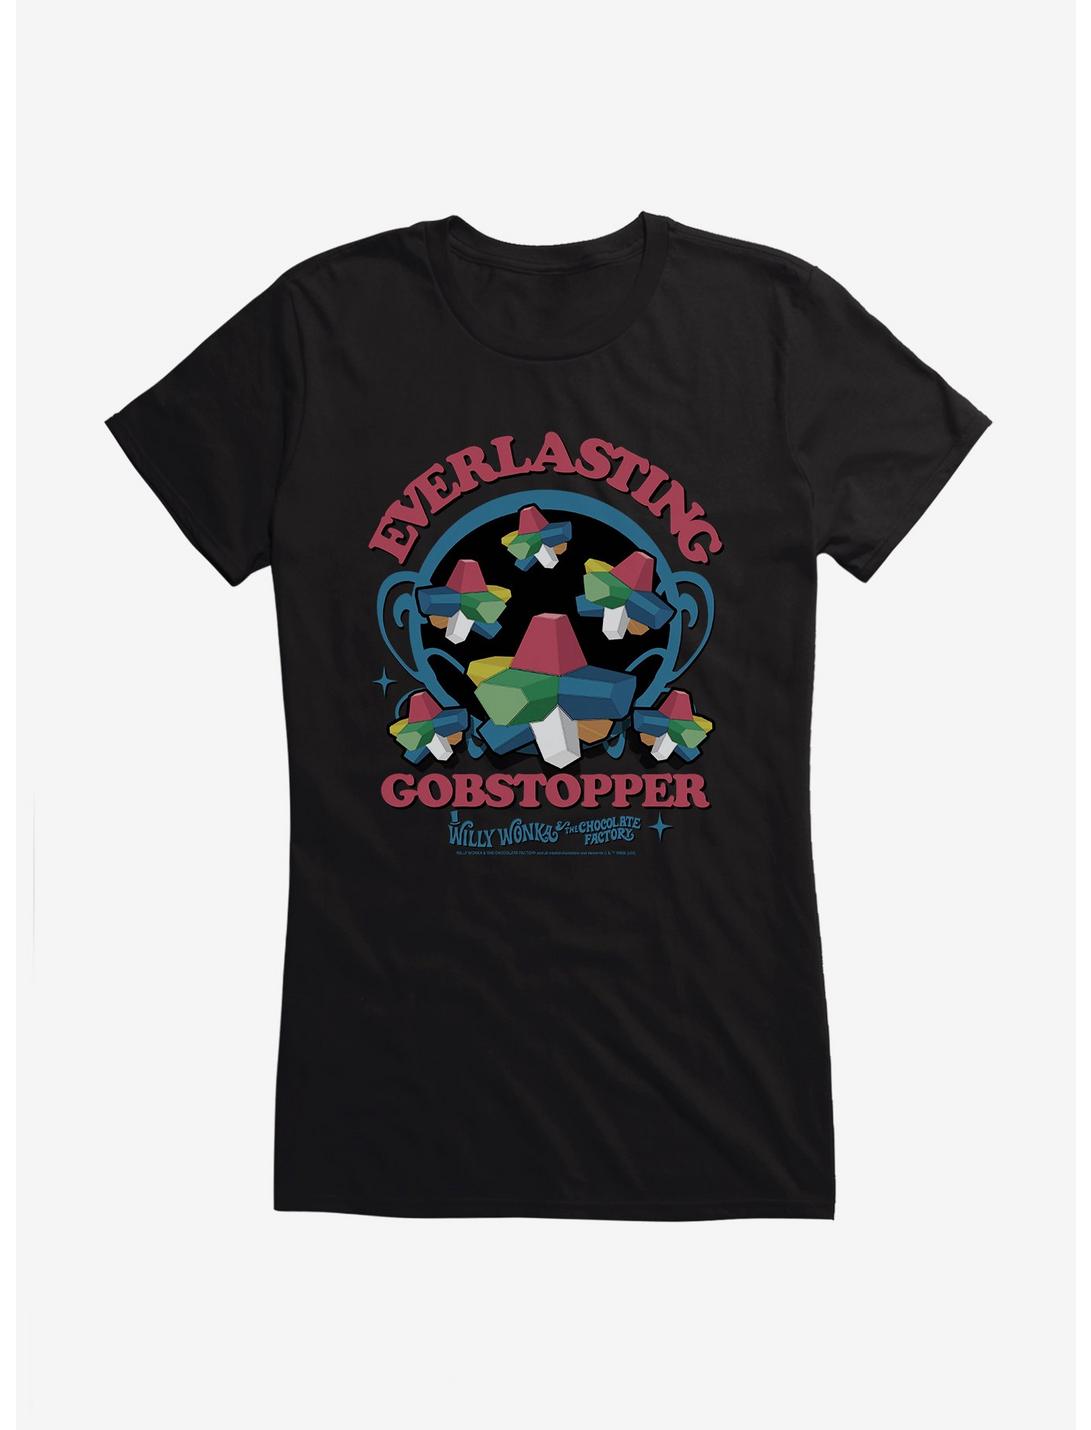 Willy Wonka And The Chocolate Factory Ever Lasting Gobstopper Girls T-Shirt, , hi-res